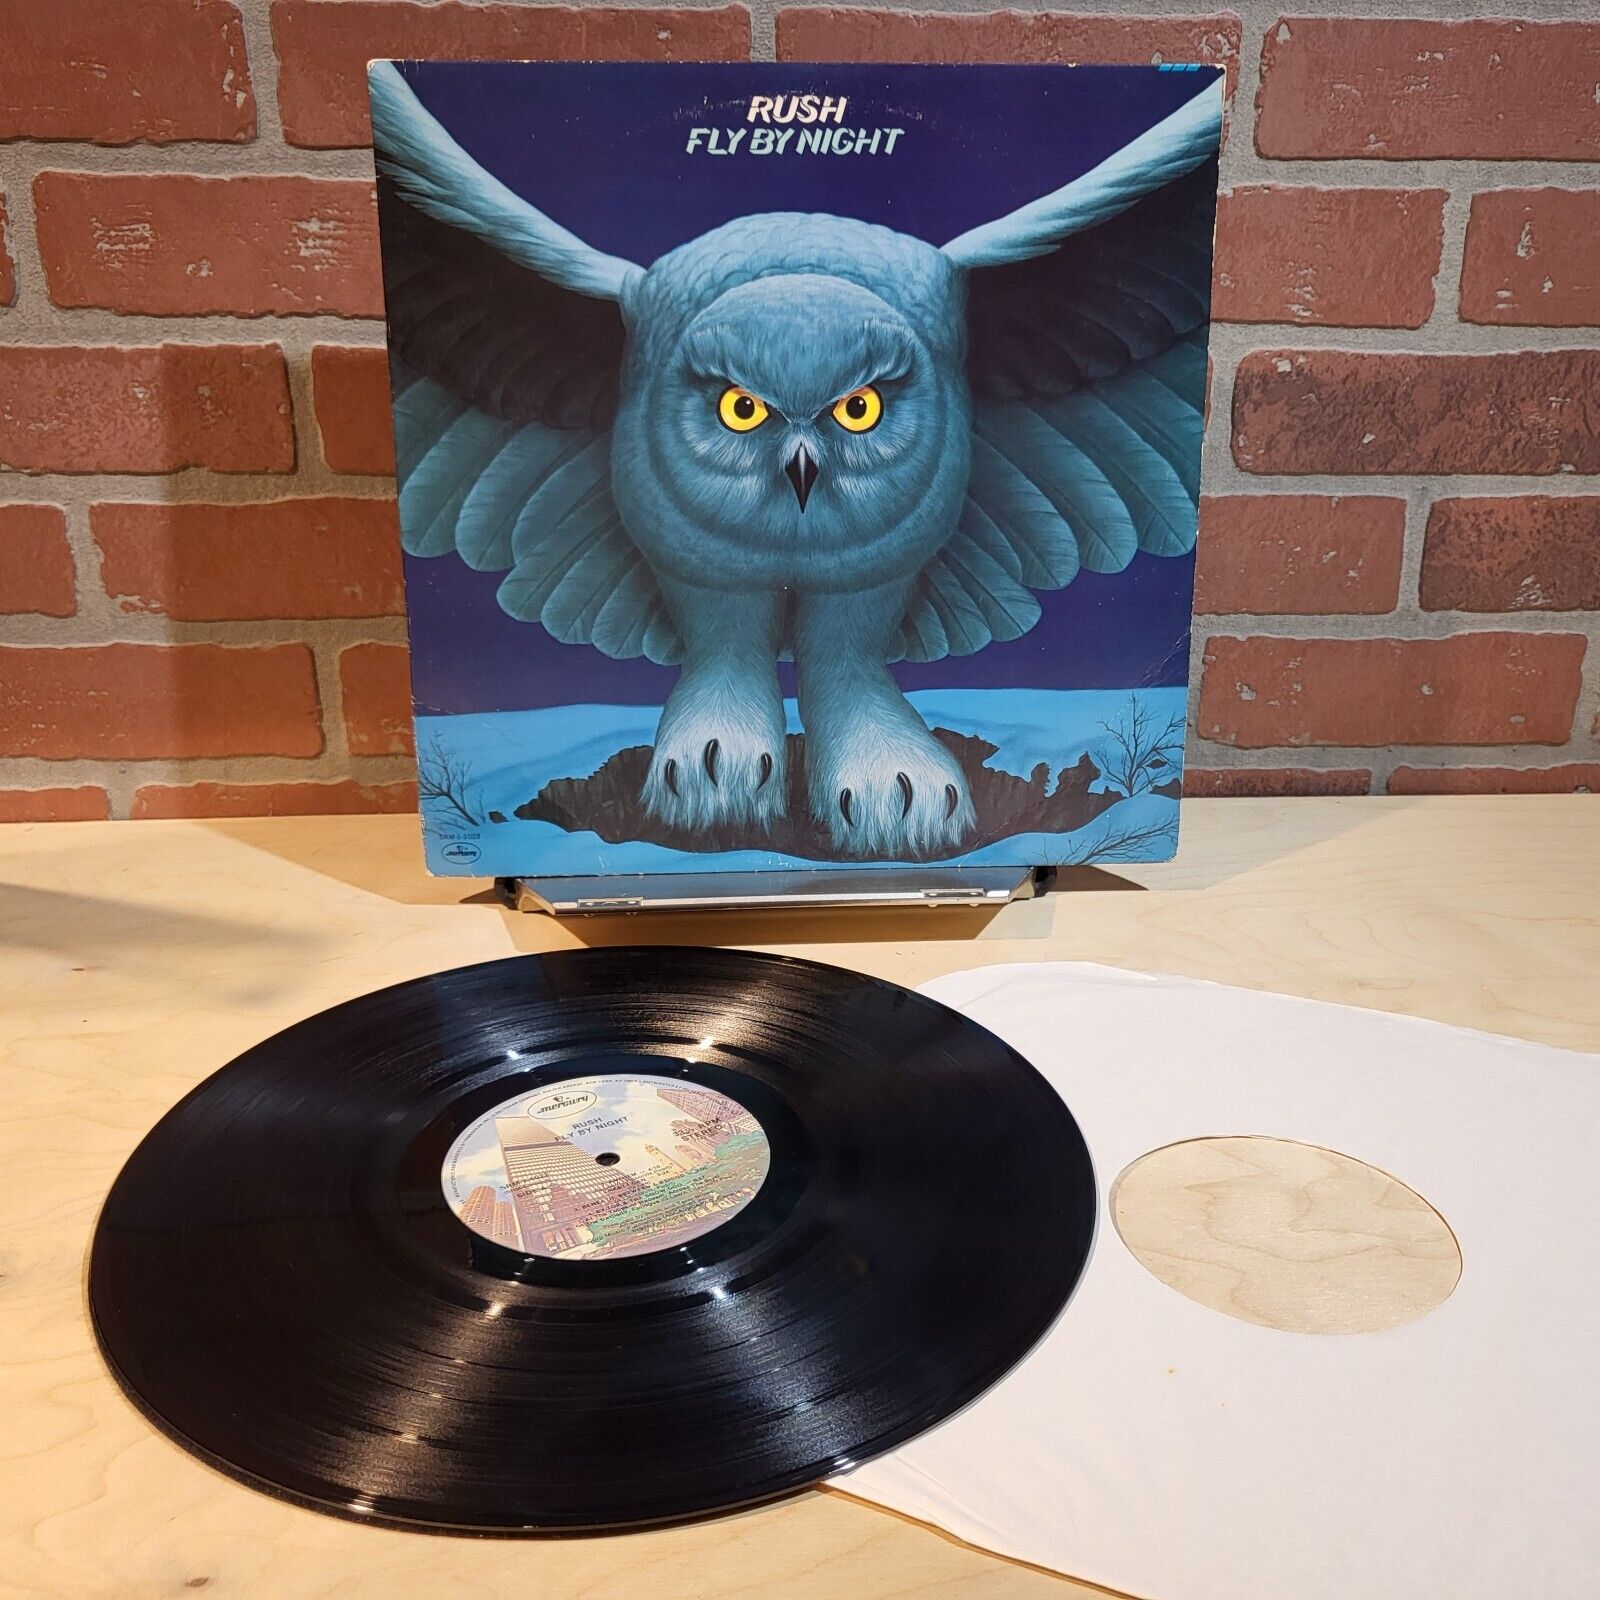 Rush  Fly By Night  1975 Pressing LP  Penguin Yard Sale